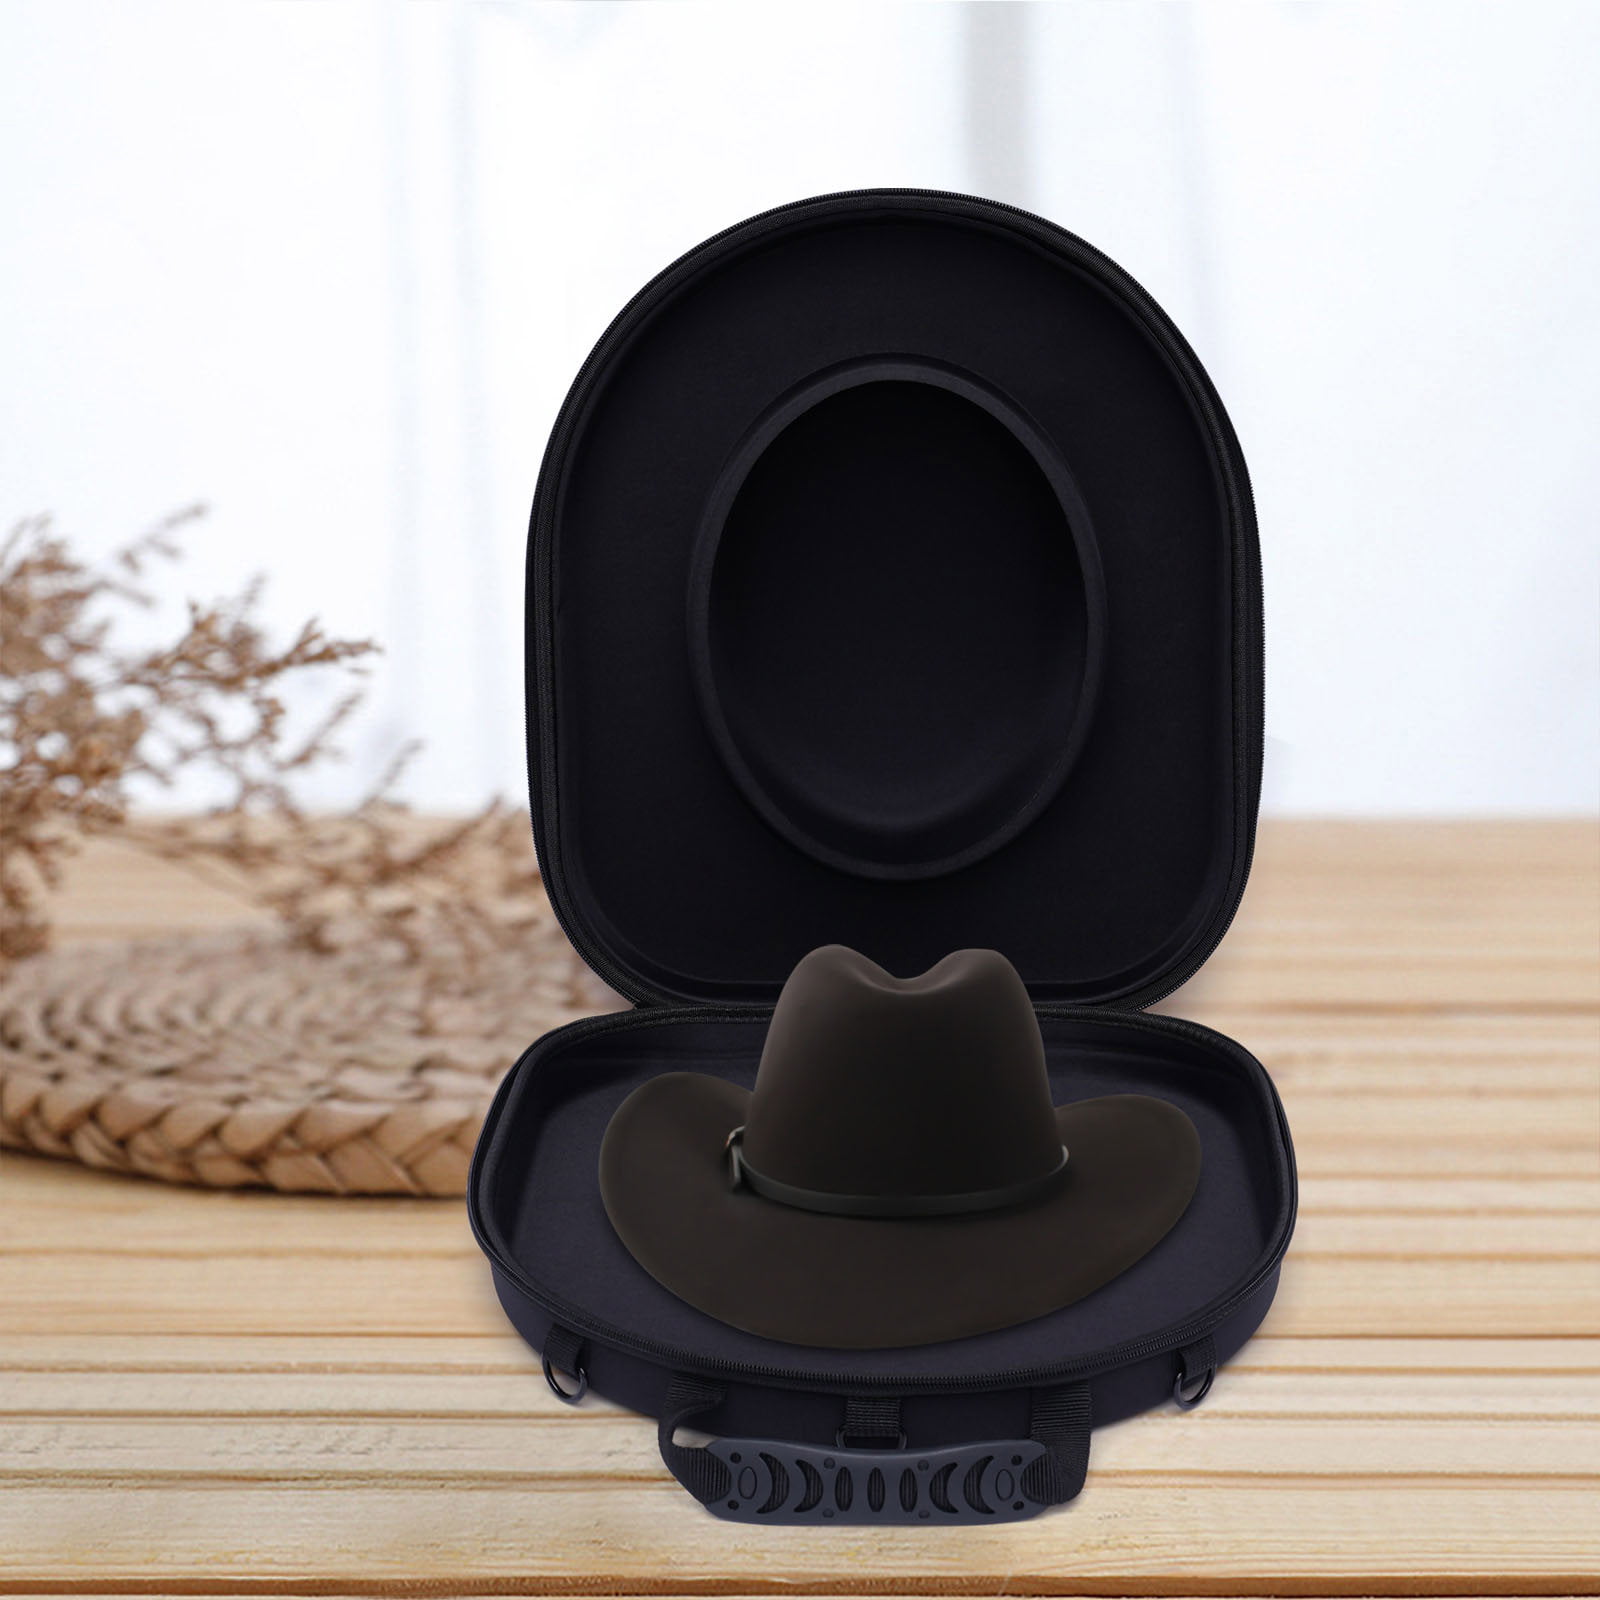 Anysiny Hat Carrier Case for Travel-Crush Proof Cowboy Hat Case Box Storage Organizer Protects Up 2 Cowboy Hats for Stetson with Adjustable Carry